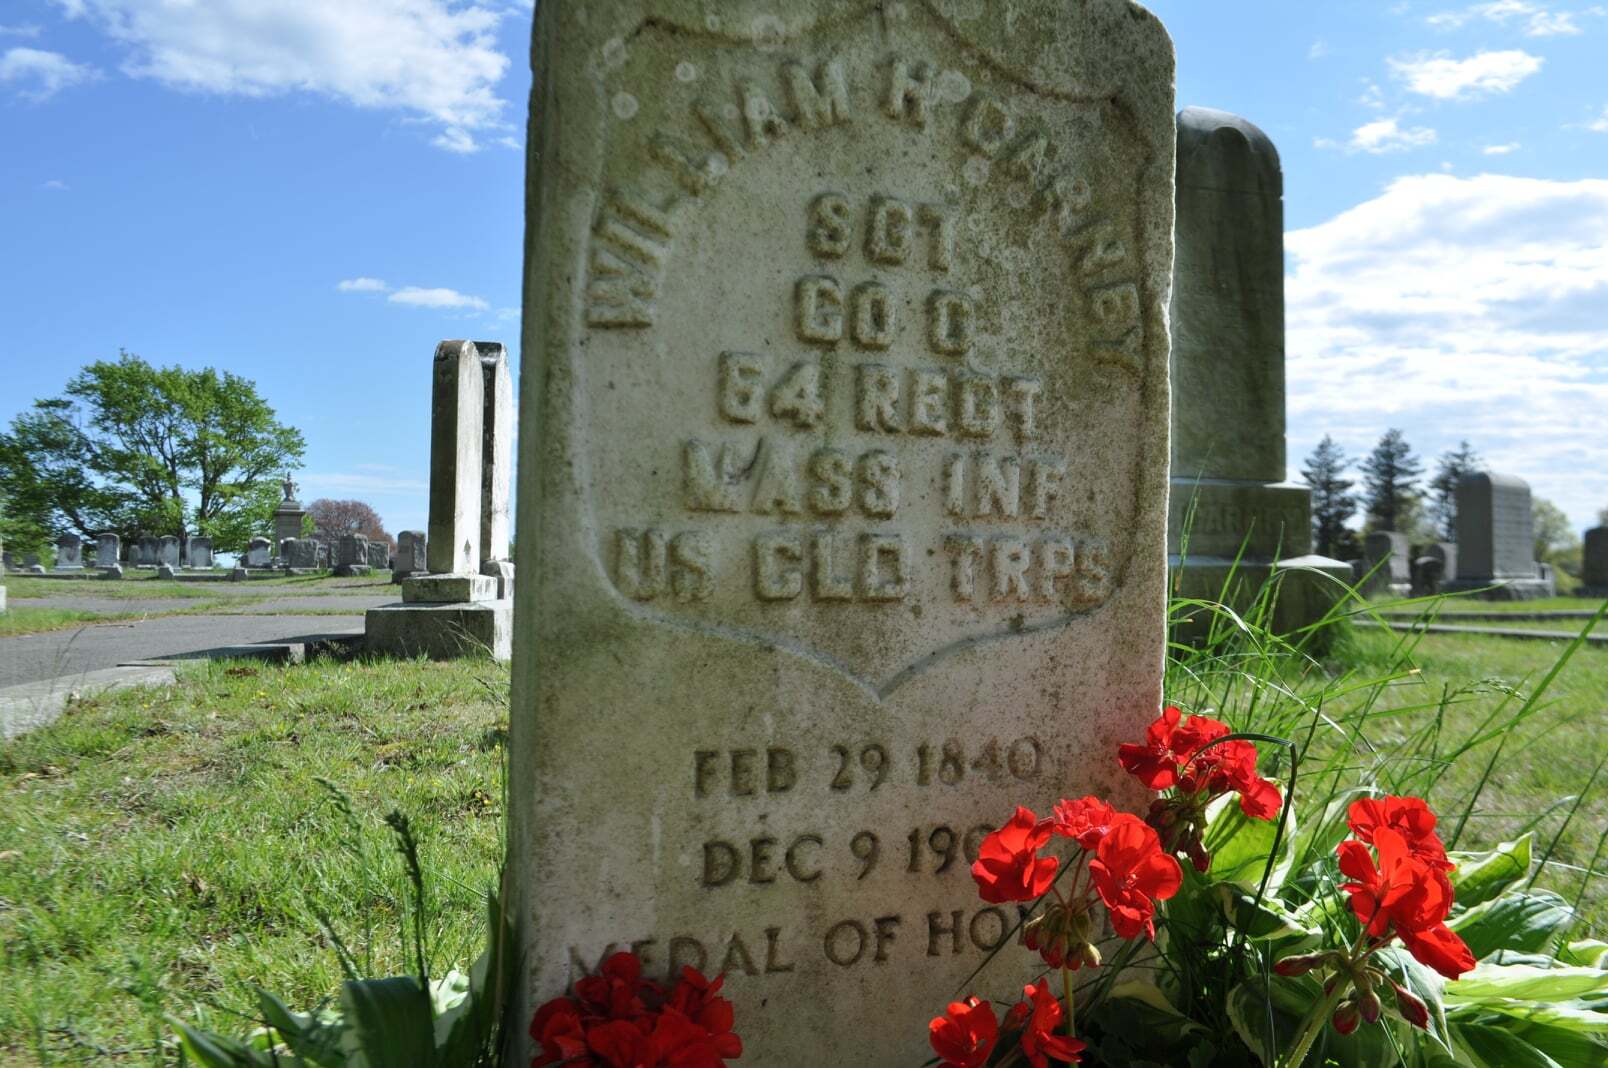 Grave of Sergeant William H. Carney, with birth and death dates, and "Medal of Honor" inscribed.